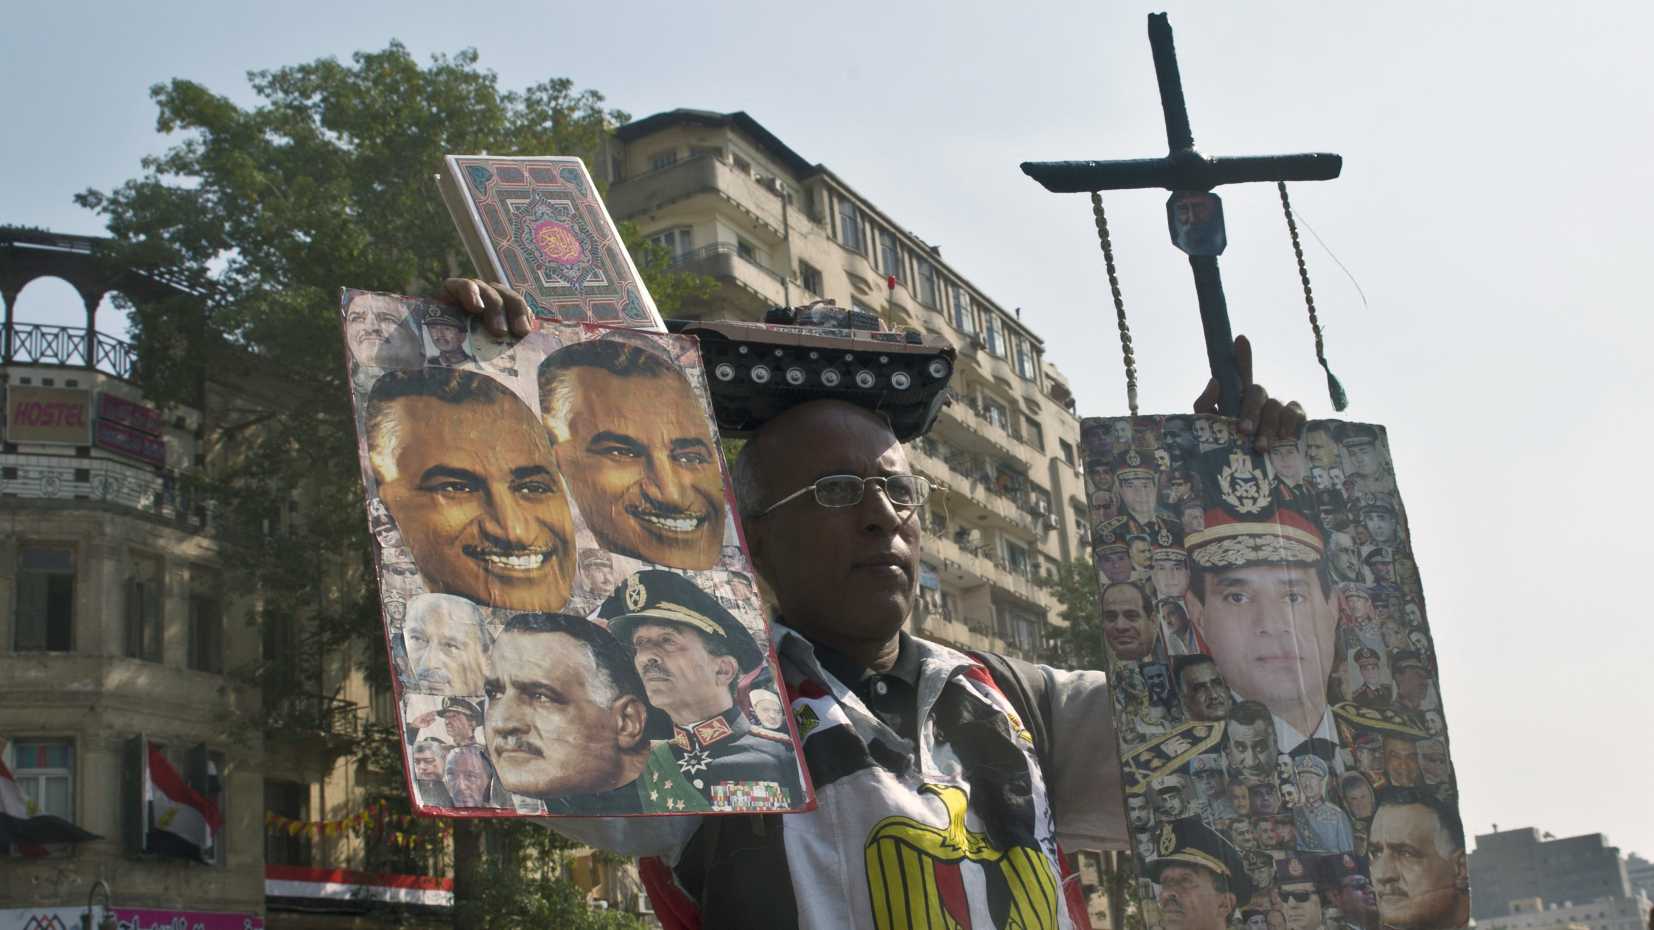 An Egyptian hold posters, one depicting Abdel Fattah al-Sisi (R), during a gathering on Tahrir Square to mark the 40th anniversary of the 1973 Arab-Israeli war on October 6, 2013 in the Egyptian capital Cairo.